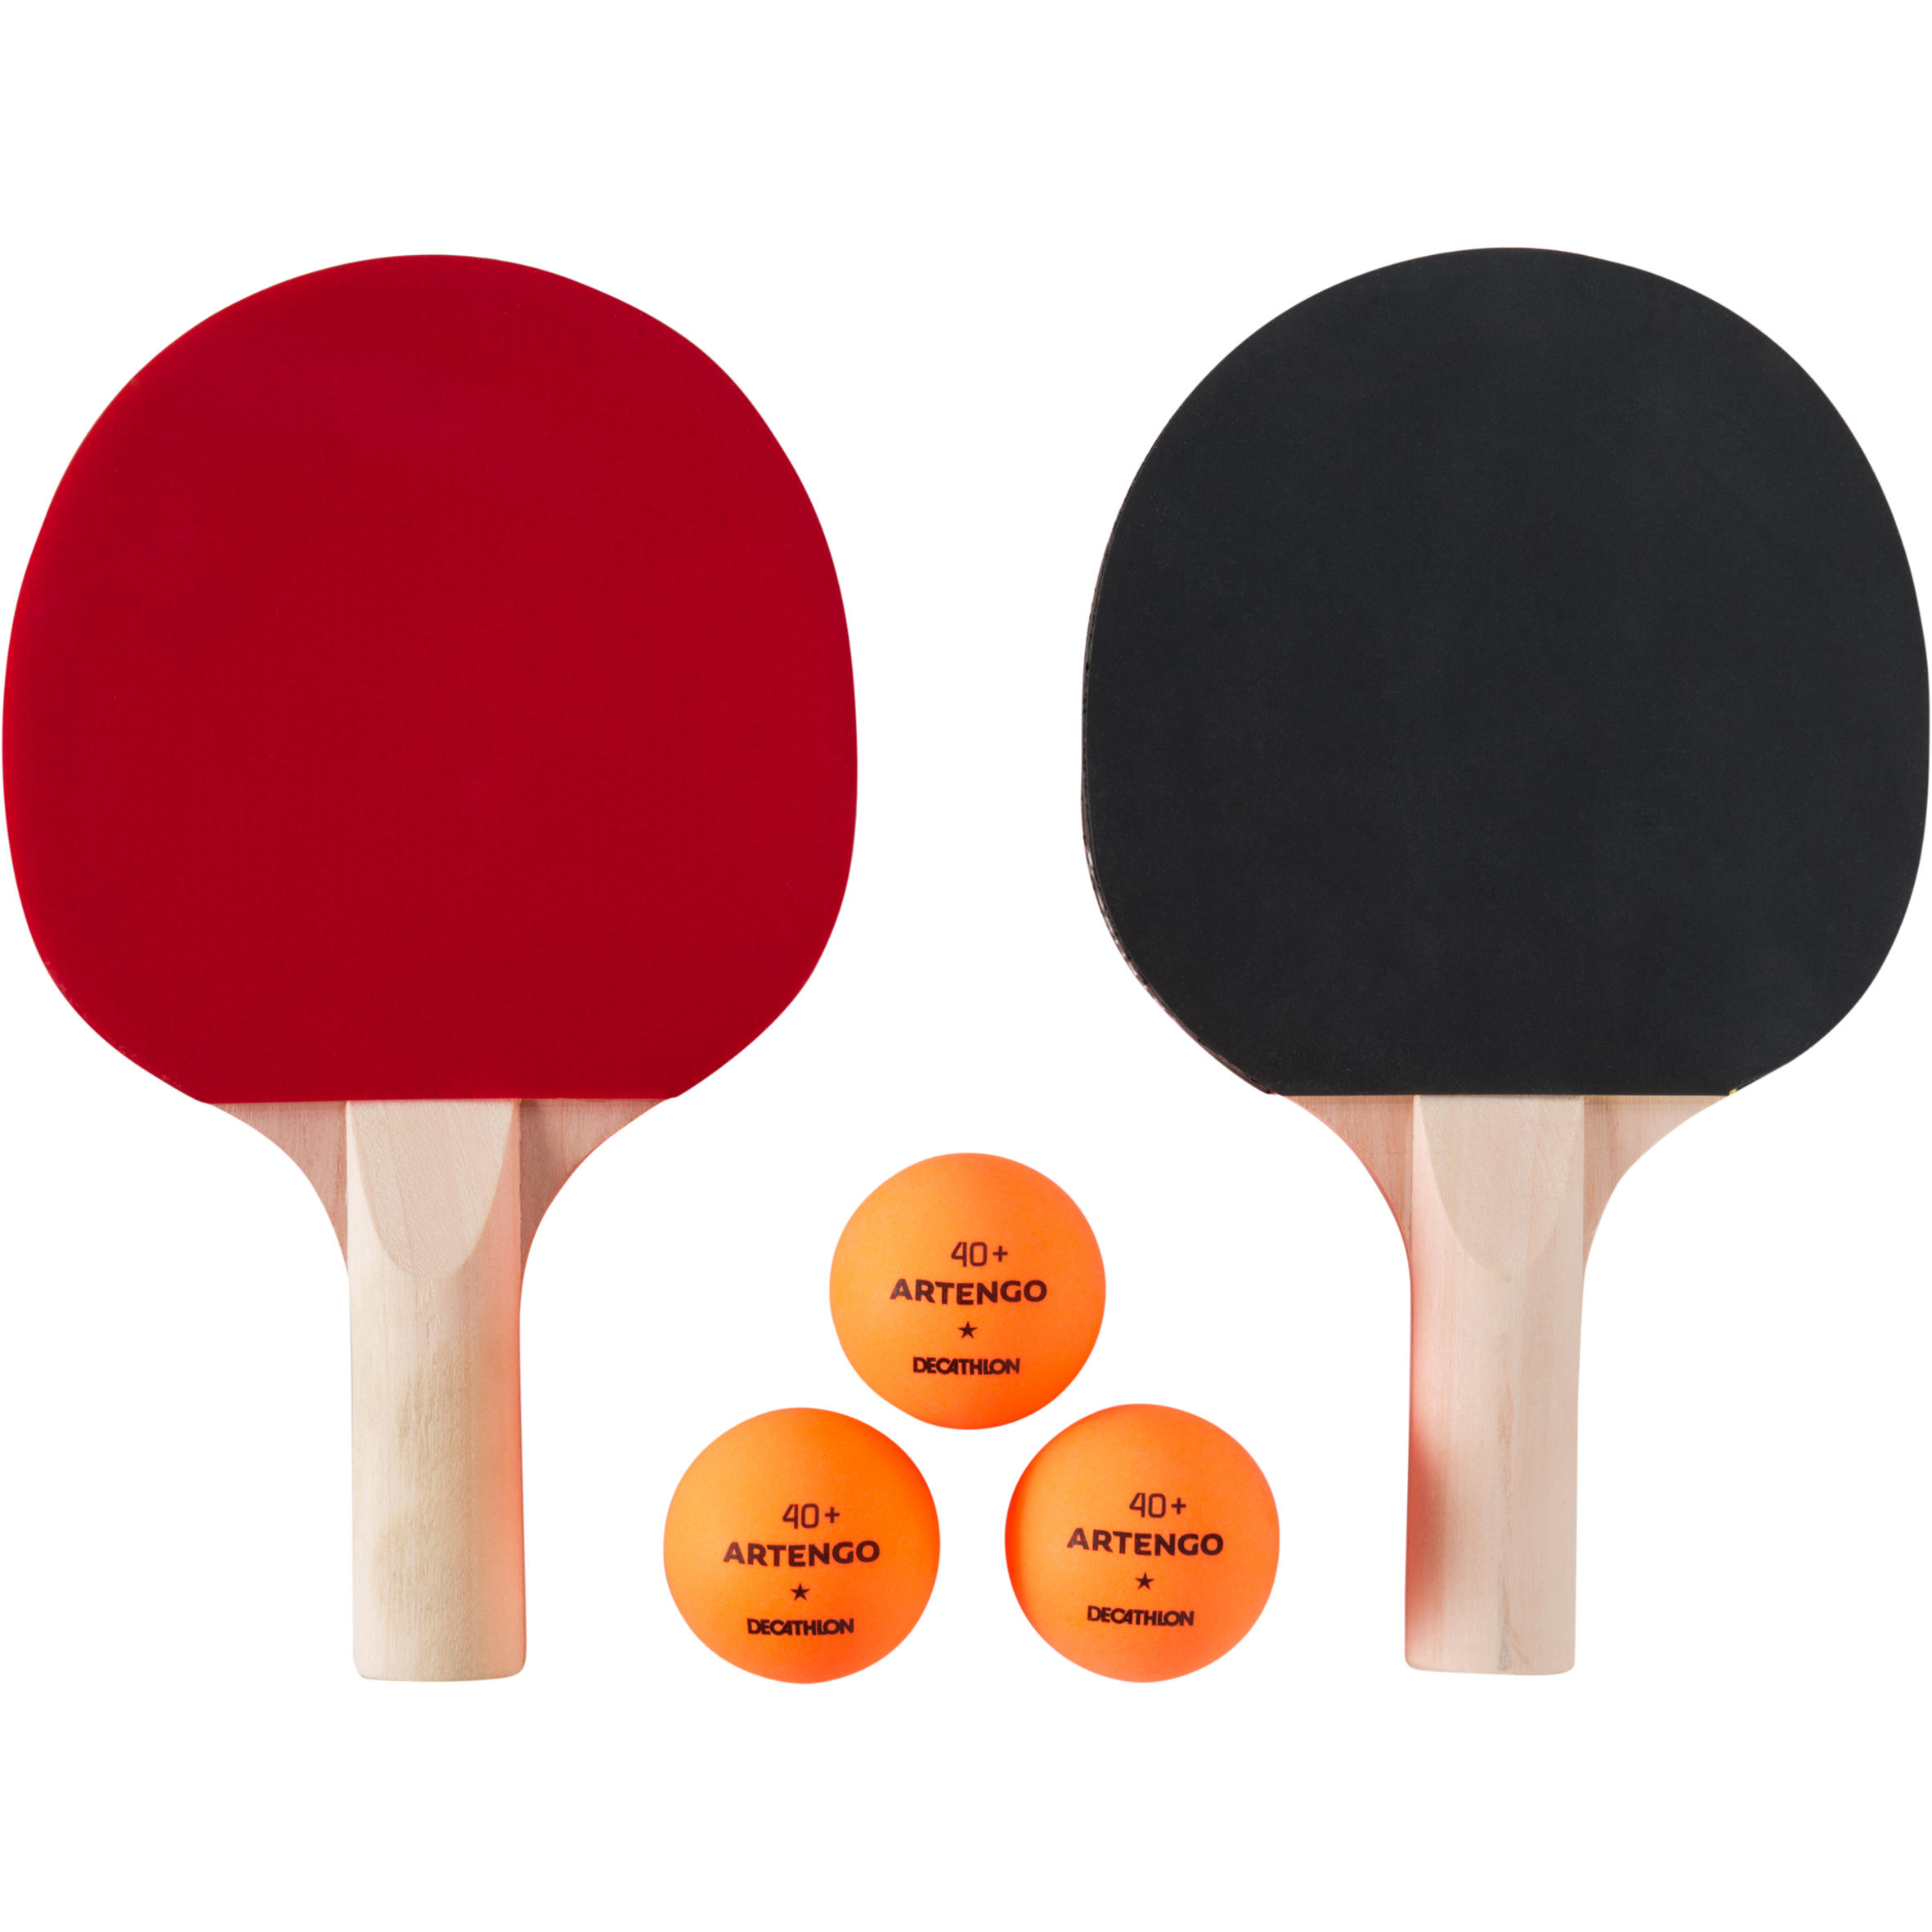 Nobranded 3 in 1 Ping Pong Balls Paddles Set Table Tennis Trainer Ping Pong Training Equipment Kit with Darts and Ring Throughing Elastic Soft Shaft Table Tennis for Beginners Kids Adult 